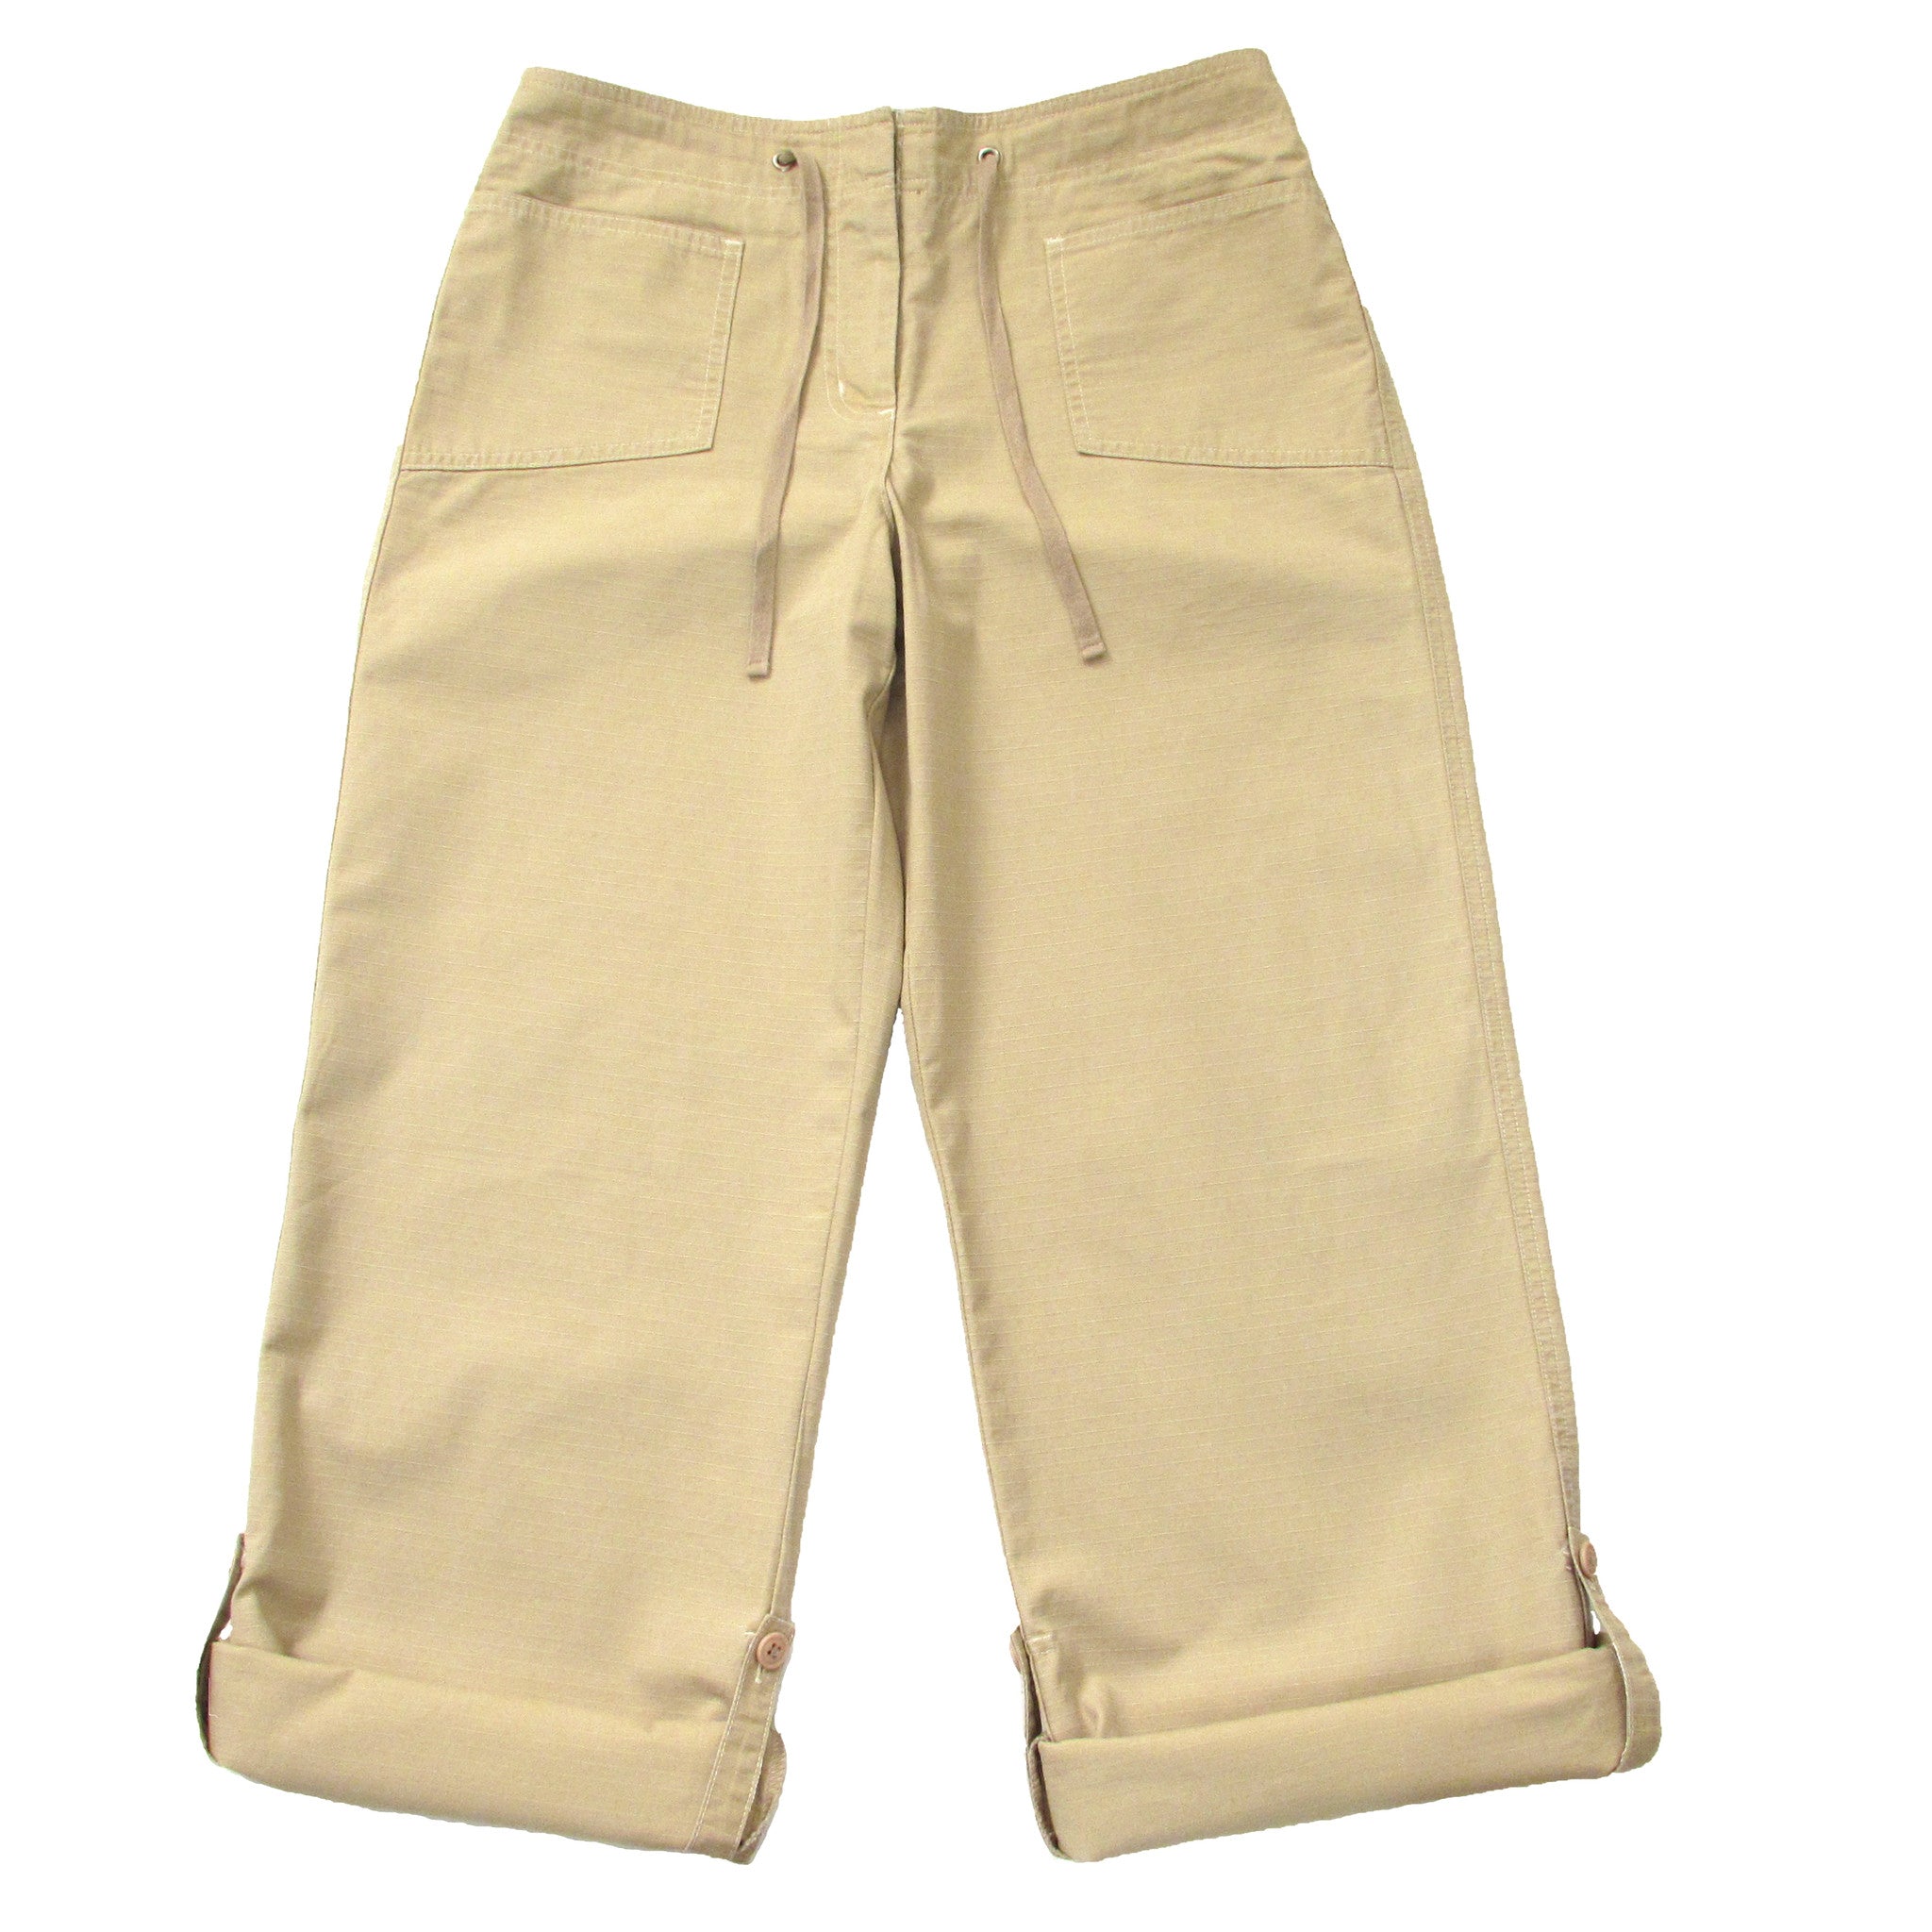 New York And Company Khaki Cargo Pants Rolled Up Look